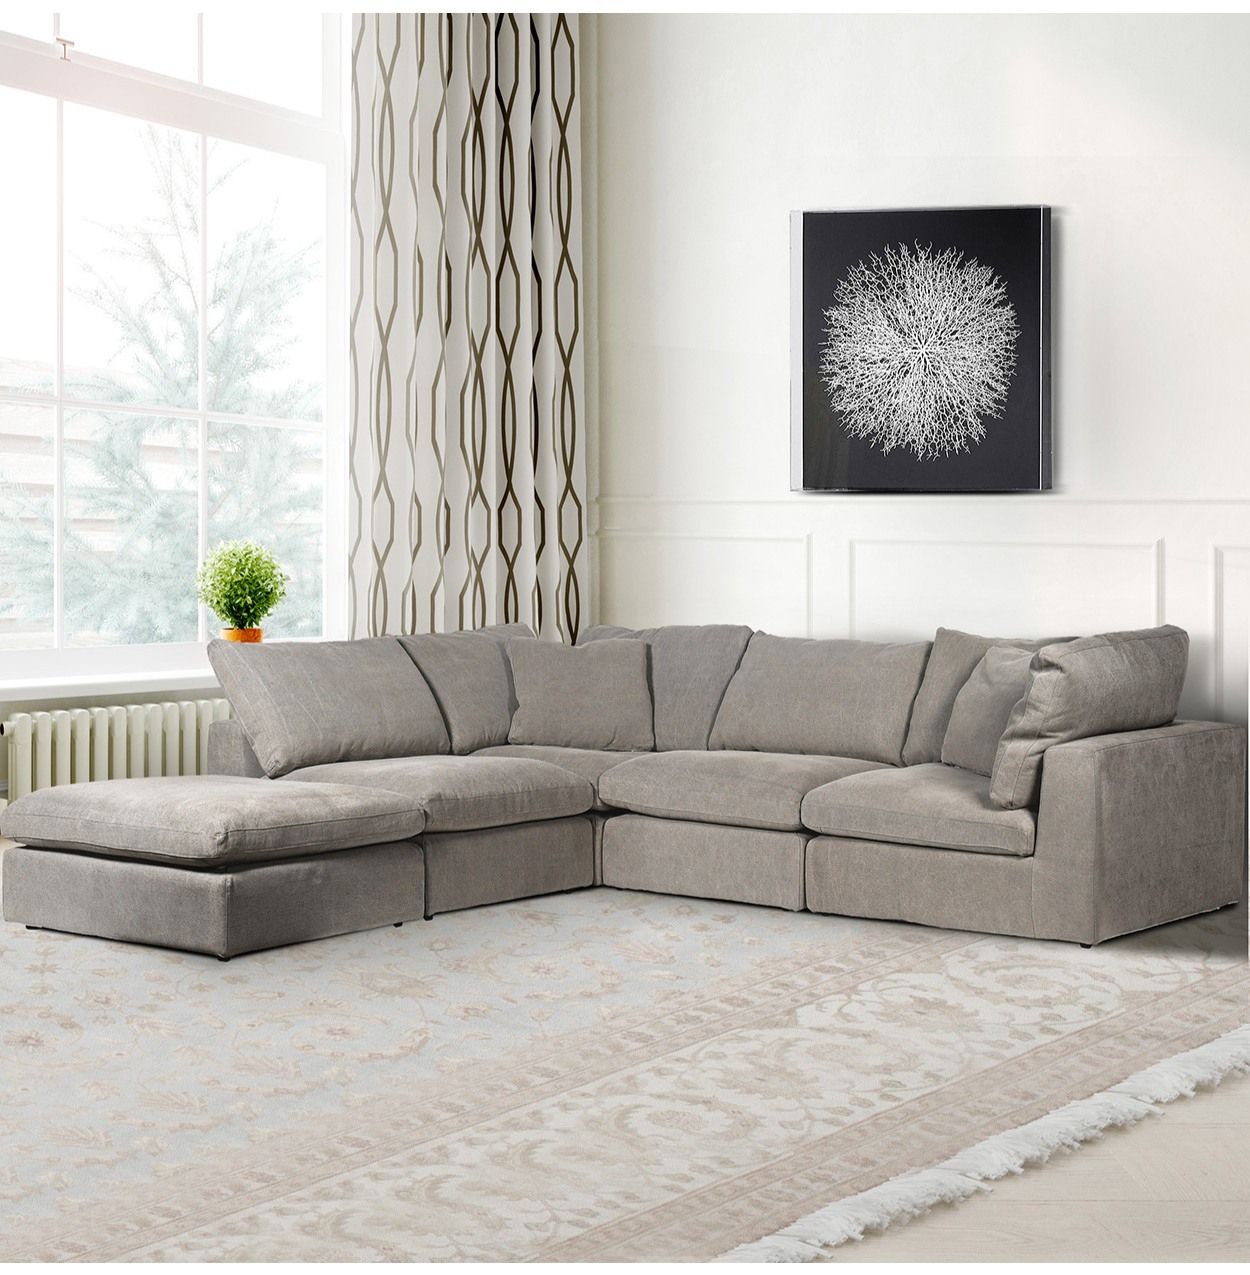 Stone Grey Linen Adjustable Corner Sofa | Nicky Cornell With Regard To Light Charcoal Linen Sofas (View 5 of 15)